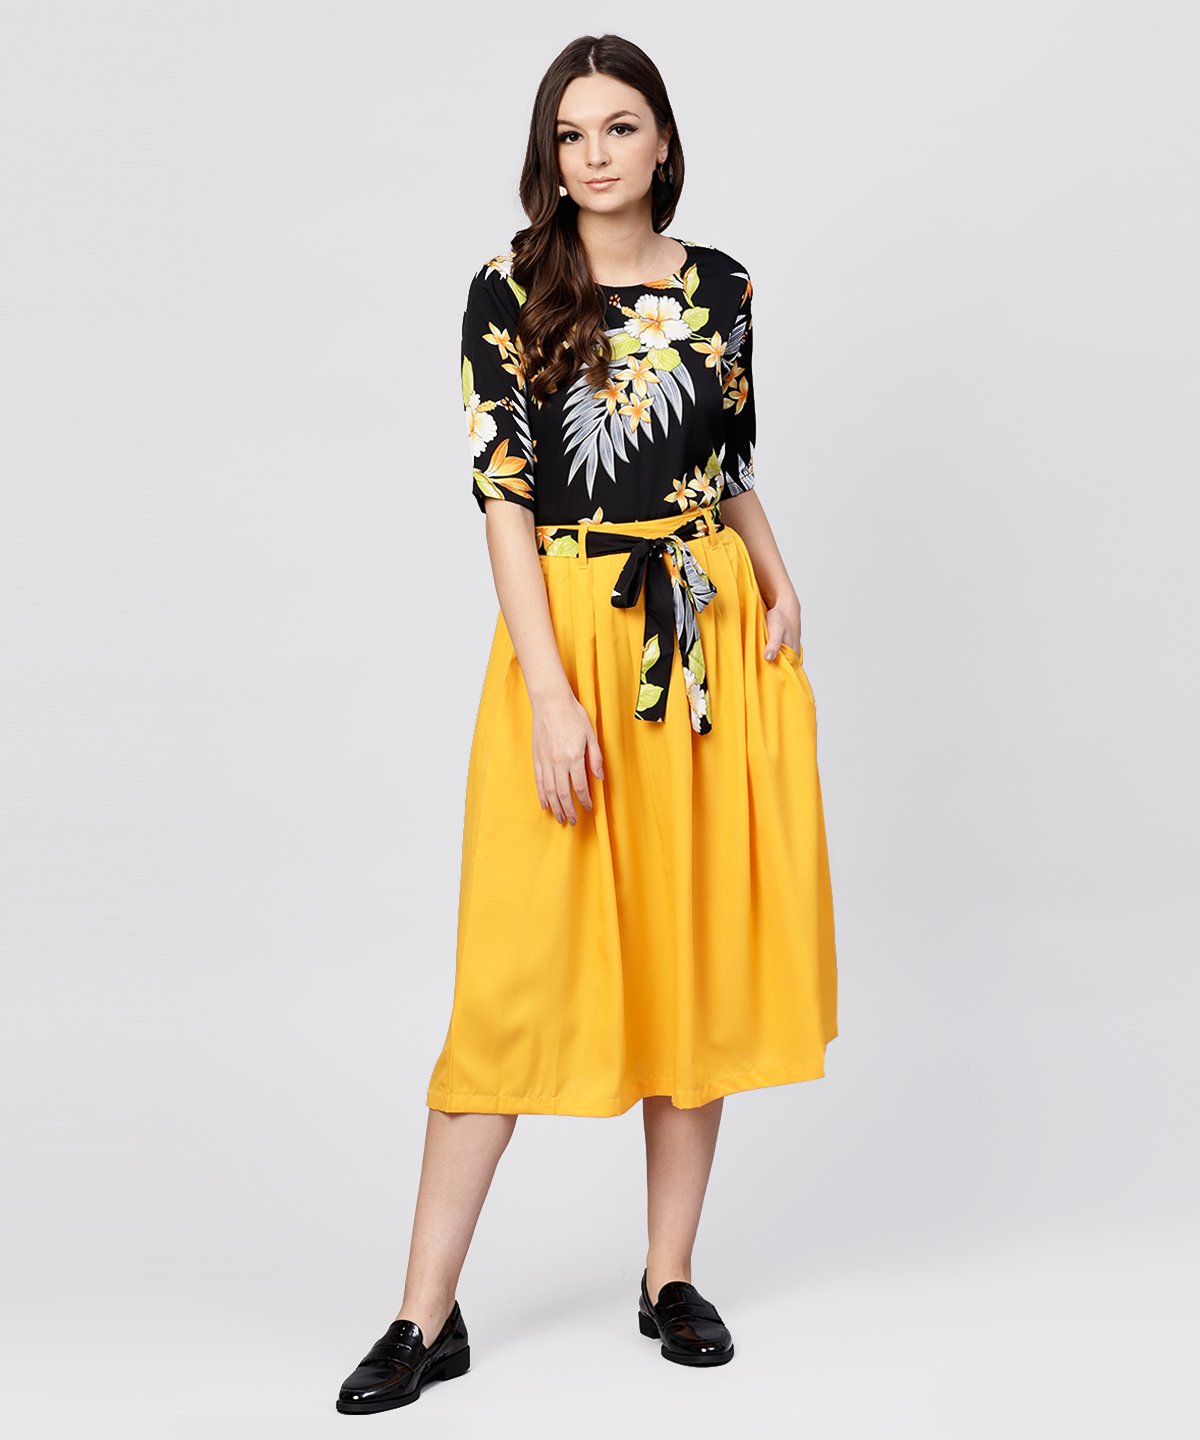 Women's Black Printed Half Sleeve Tops With Yellow Calf Length Skirt With Belt - Nayo Clothing